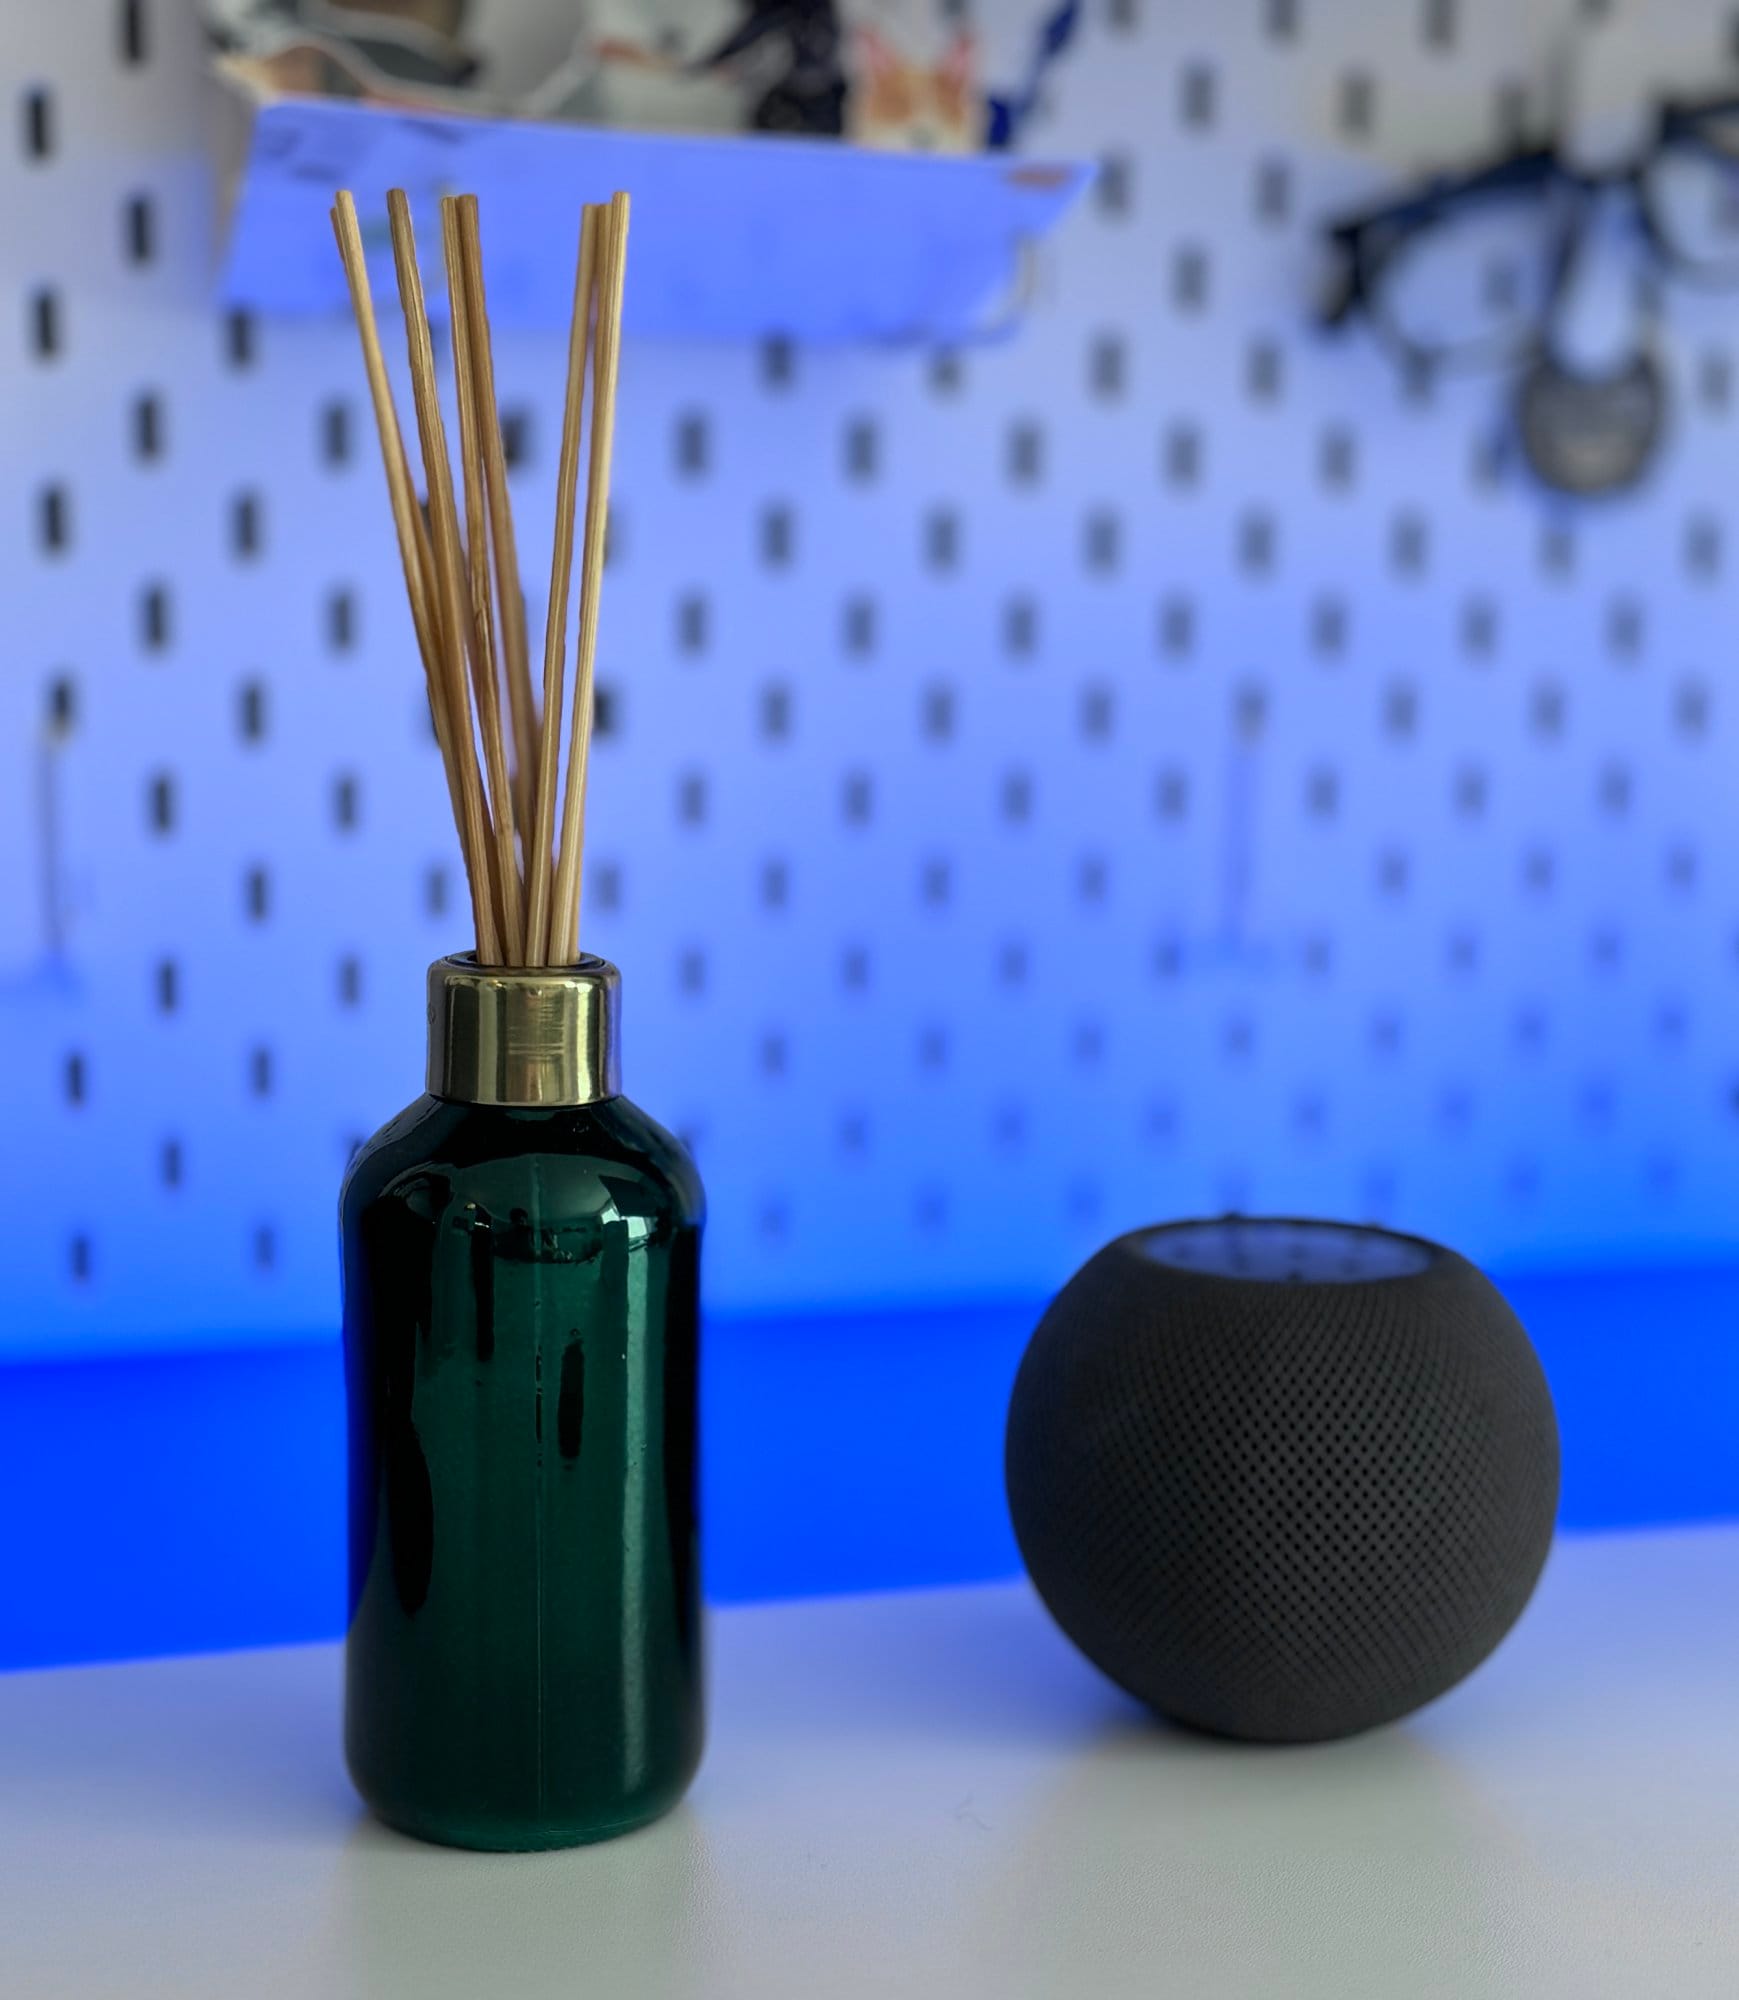 A green reed diffuser bottle with sticks on a white surface, with a blurred background featuring a pegboard and a black speaker